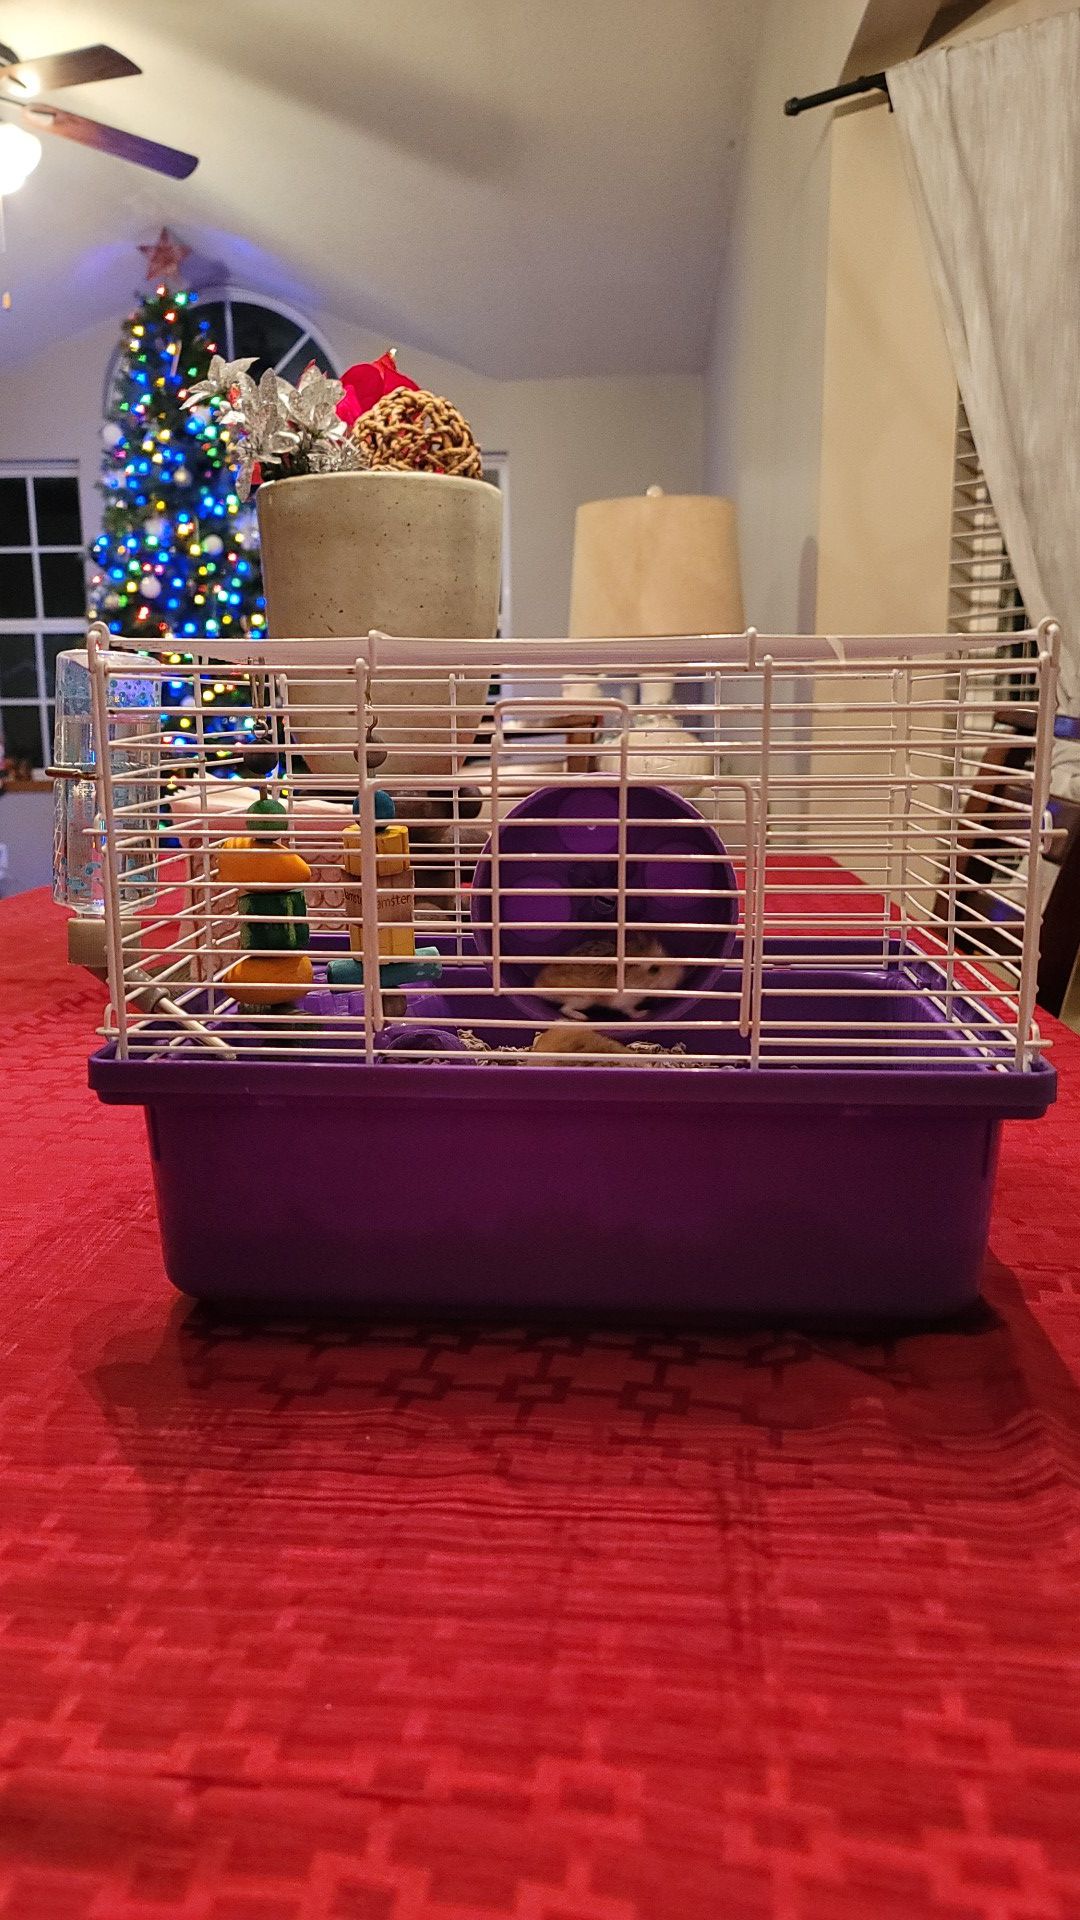 2 Hamsters and cage